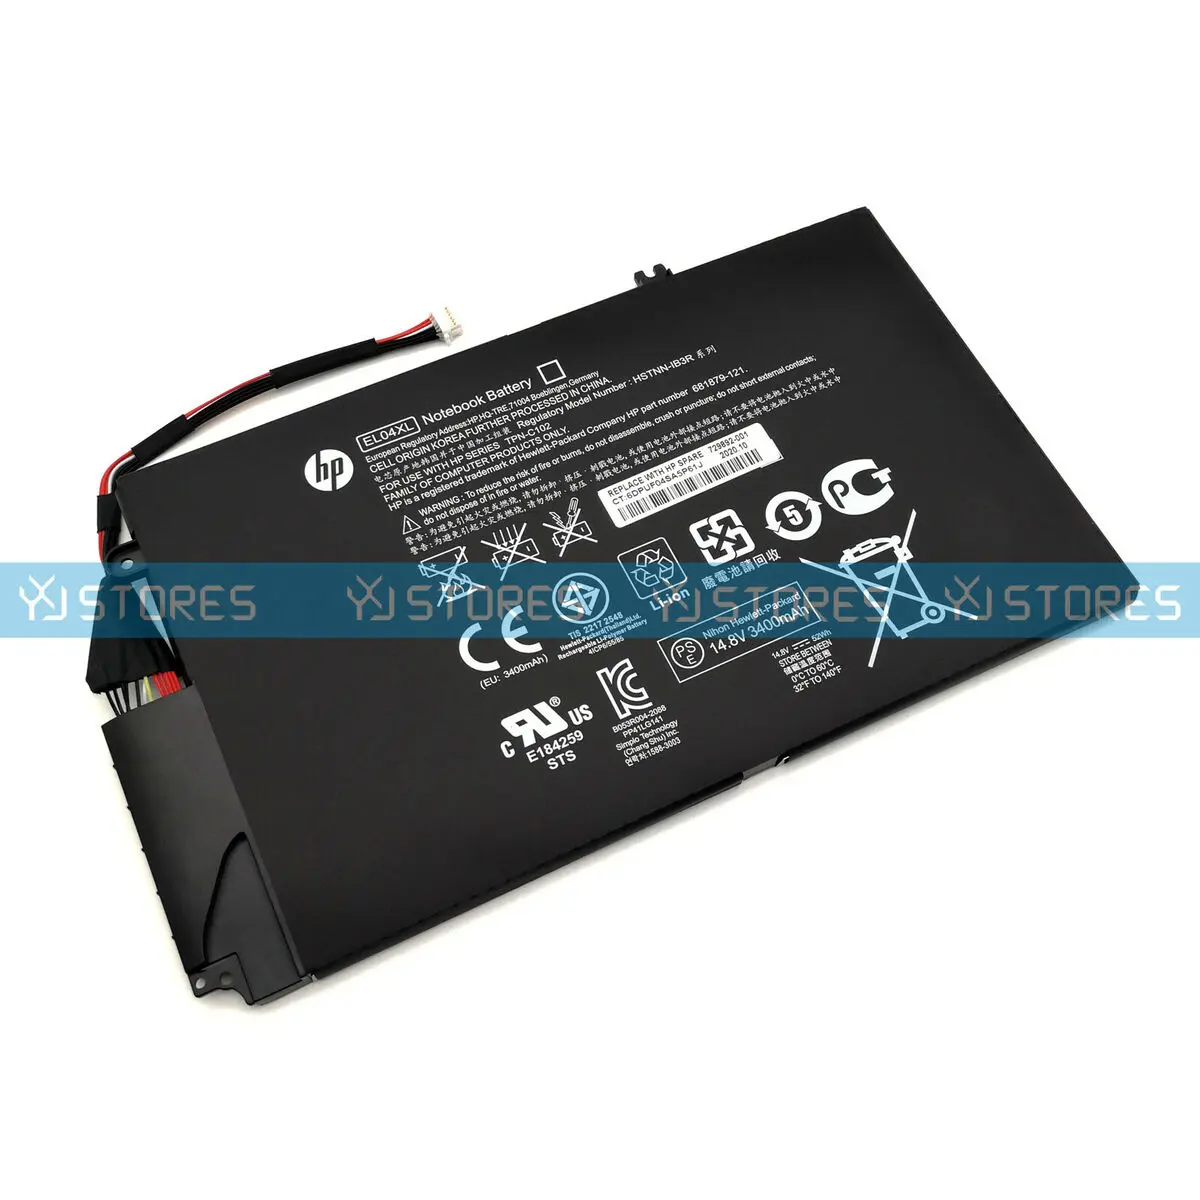 hewlett packard oem batteries - What is the difference between OEM and aftermarket laptop battery replacement